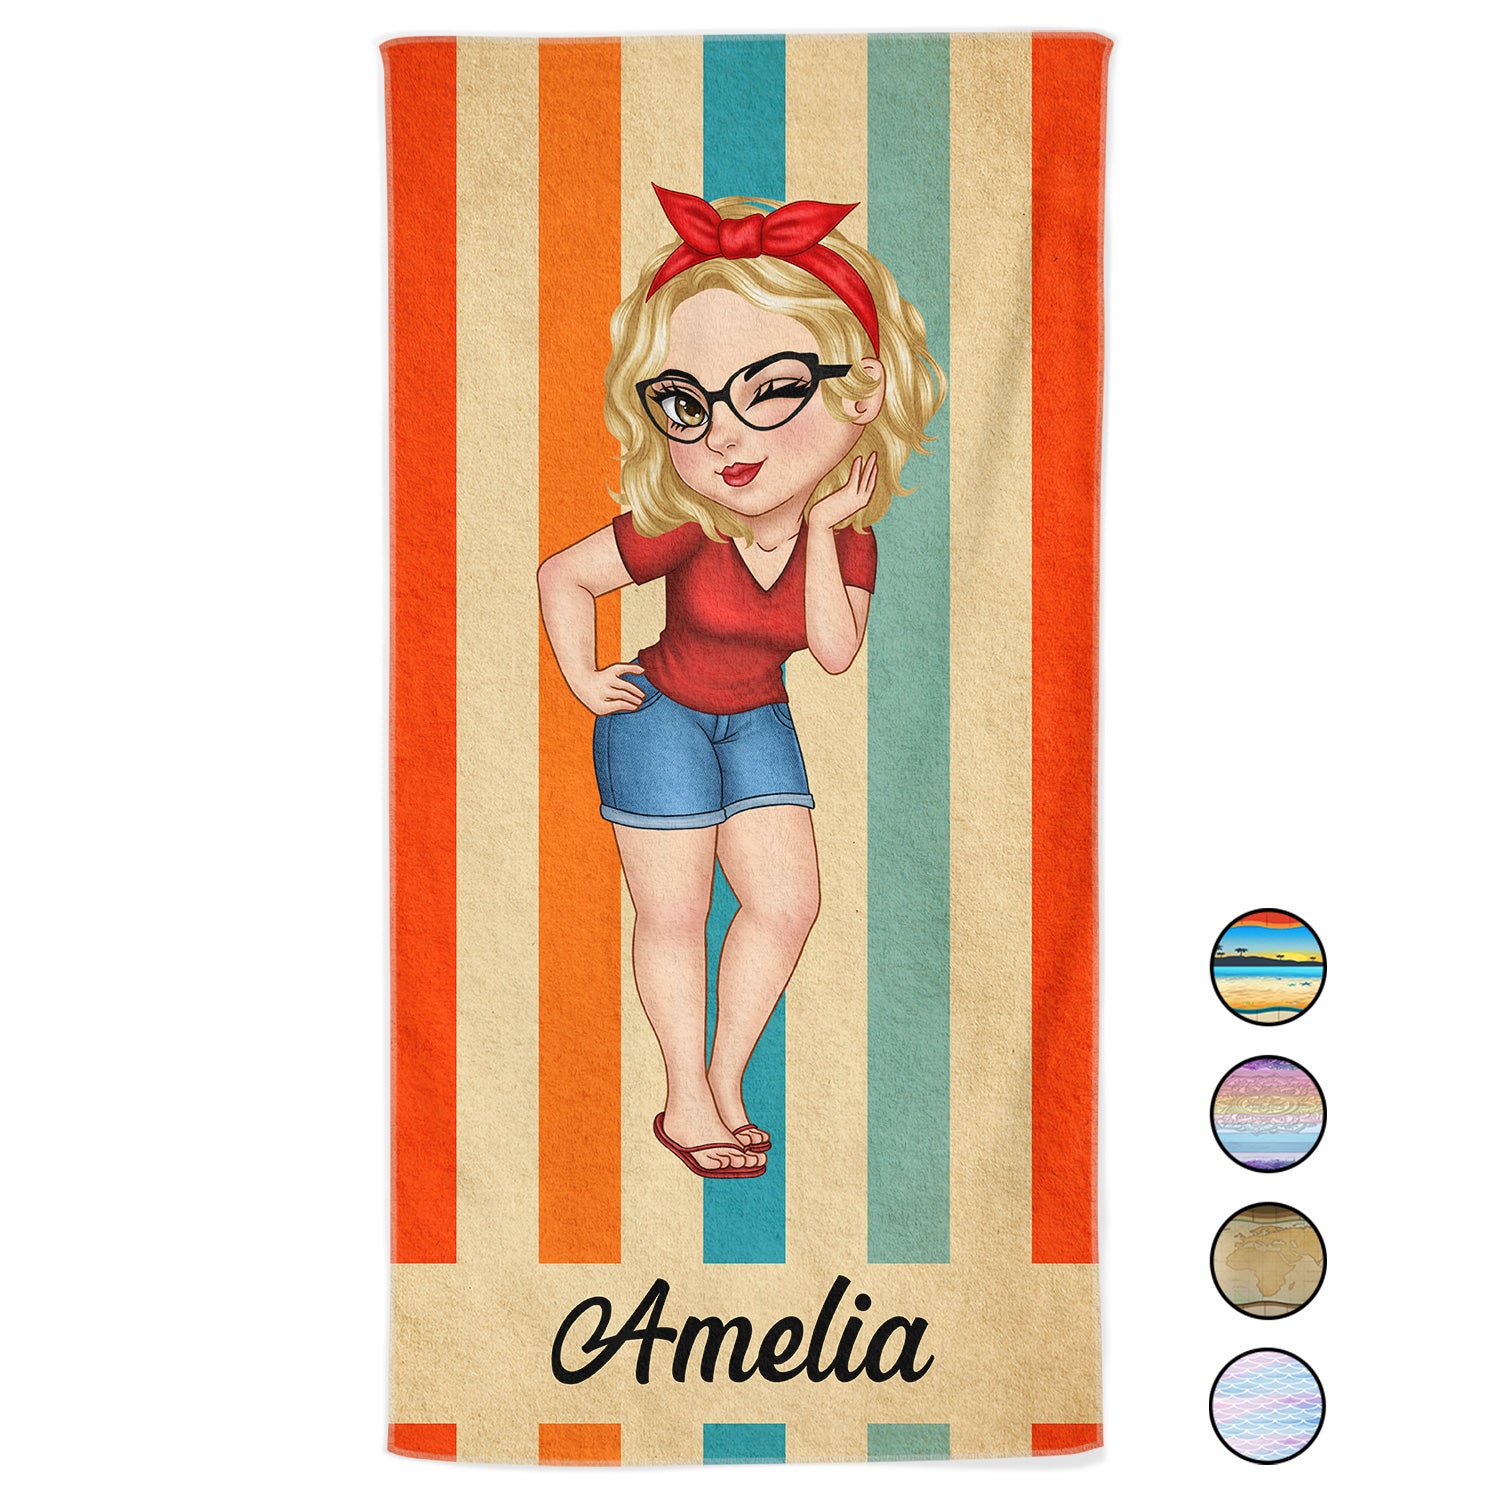 Cartoon Woman Traveling Beach Poolside Swimming Picnic - Birthday, Vacation Gift For Her, Family, Besties - Personalized Beach Towel